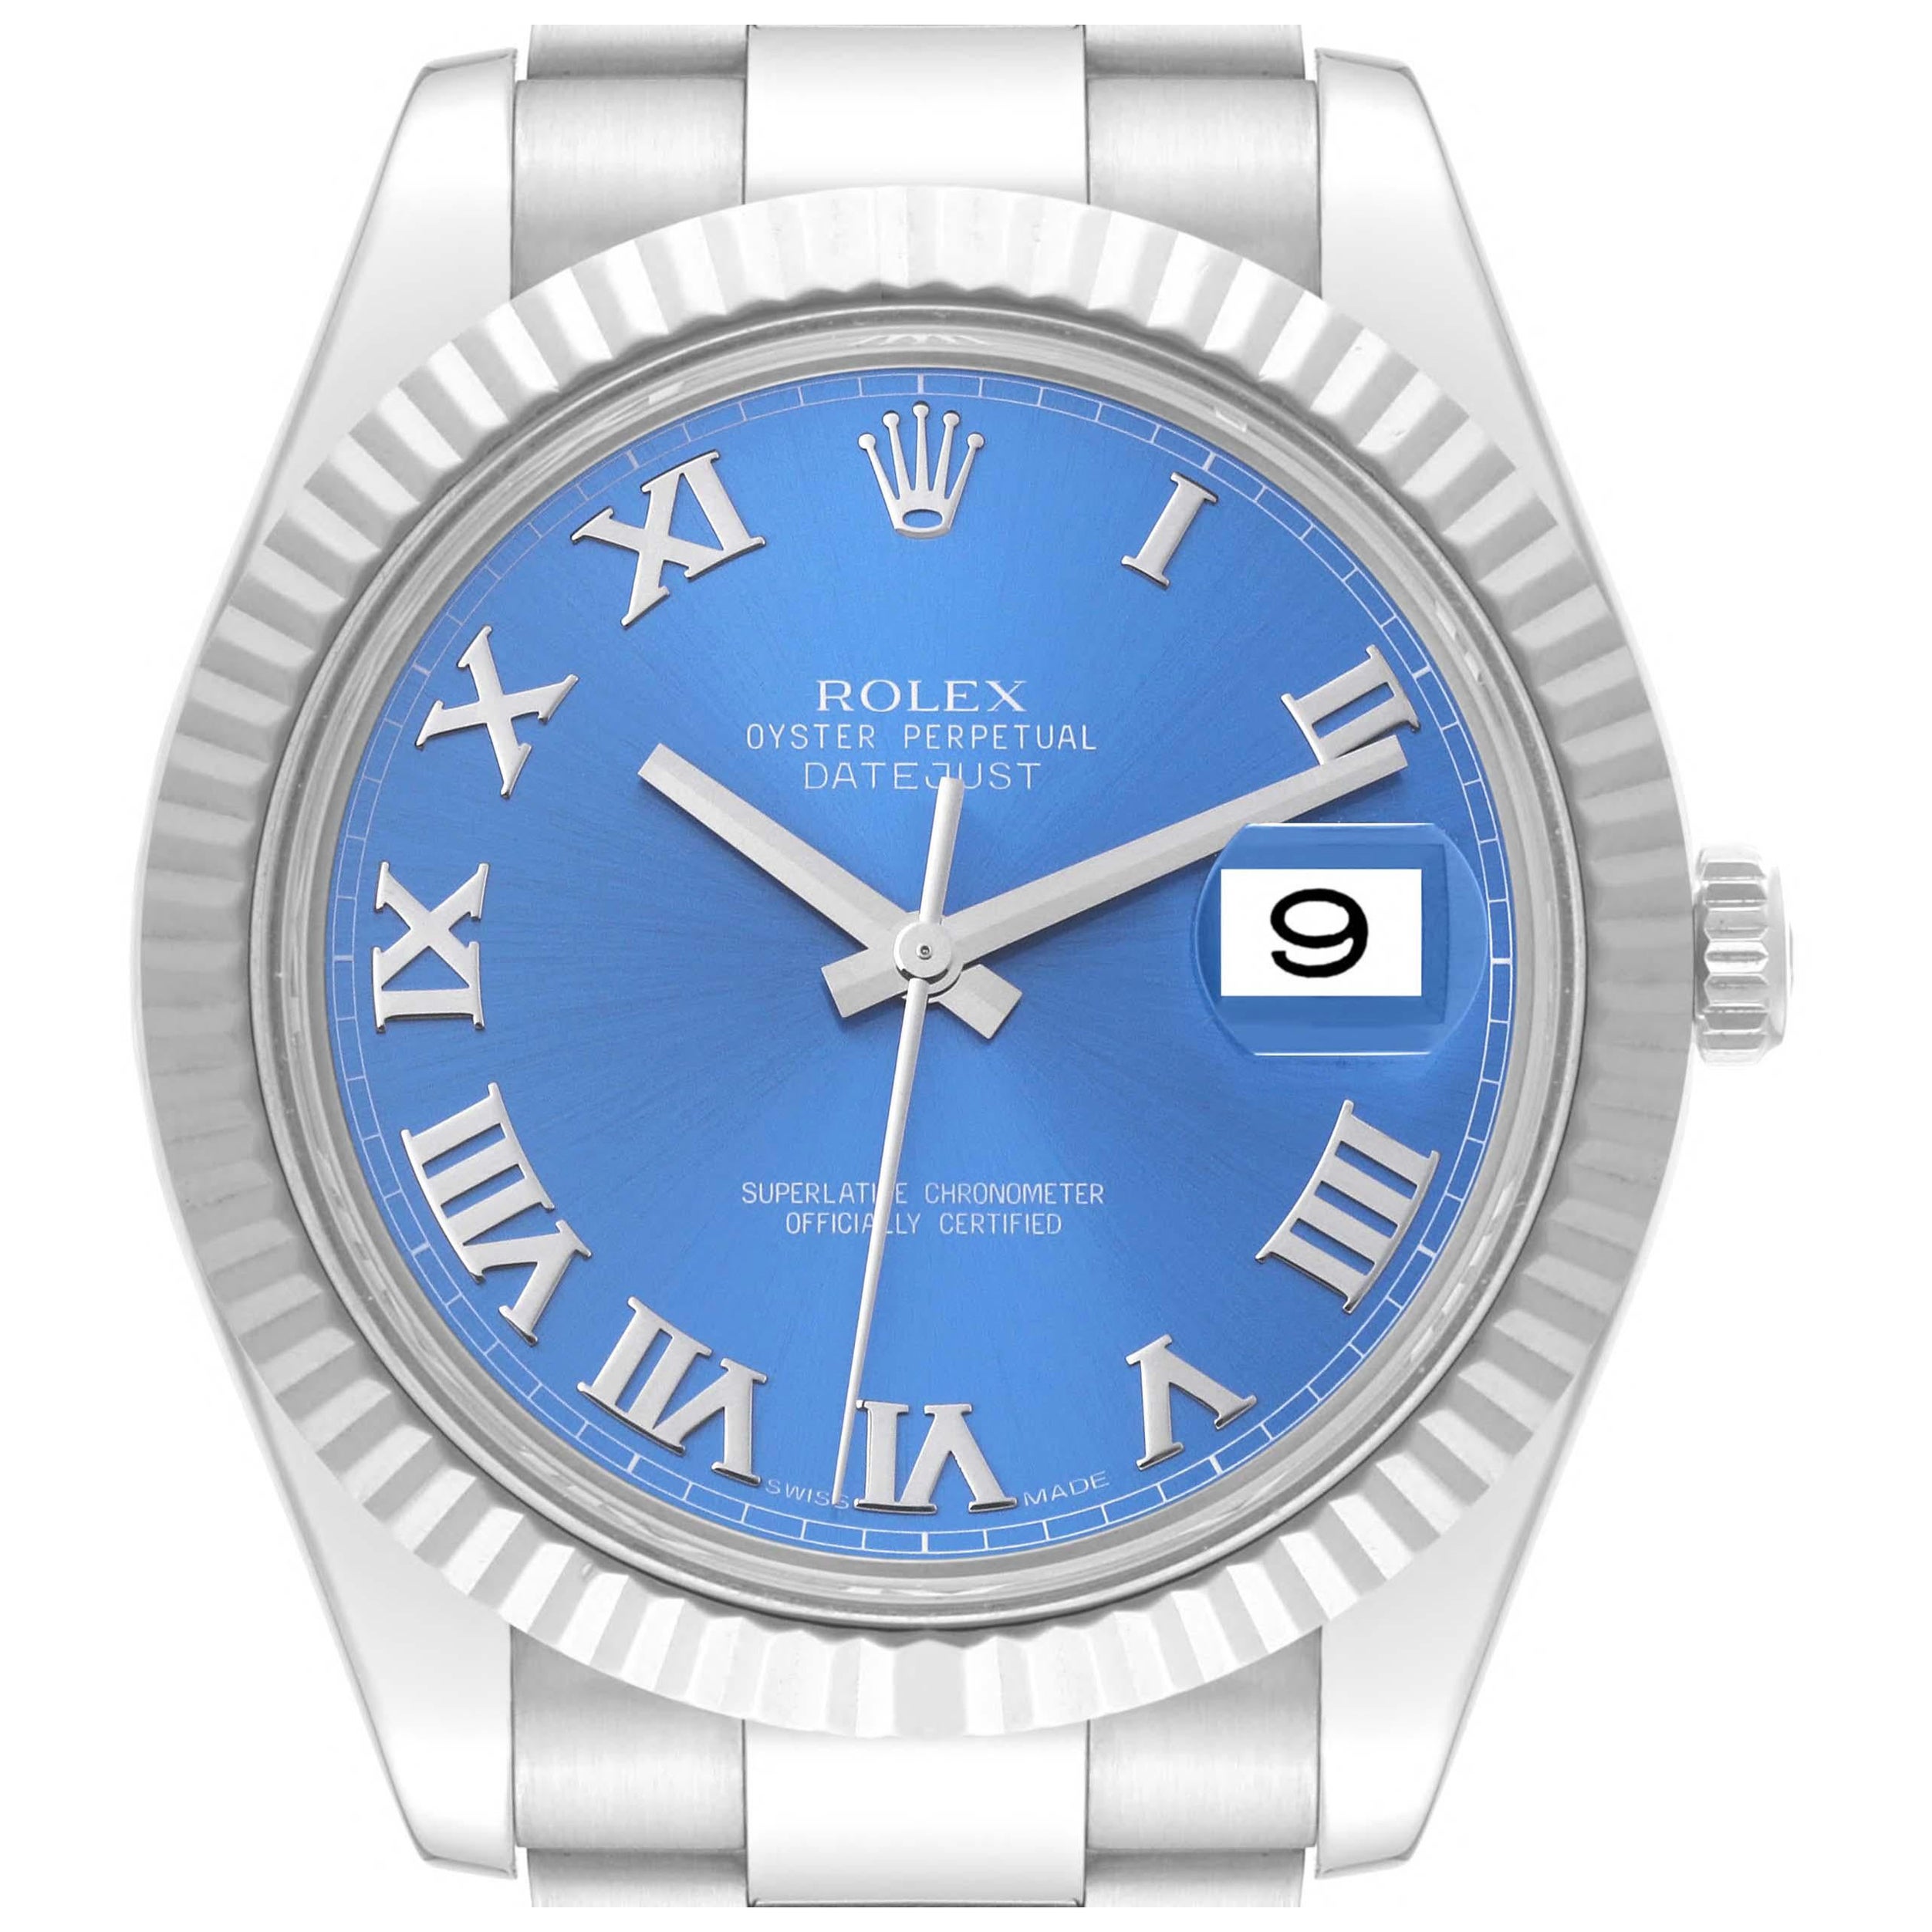 Rolex Datejust II Steel White Gold Blue Roman Dial Mens Watch 116334 For Sale